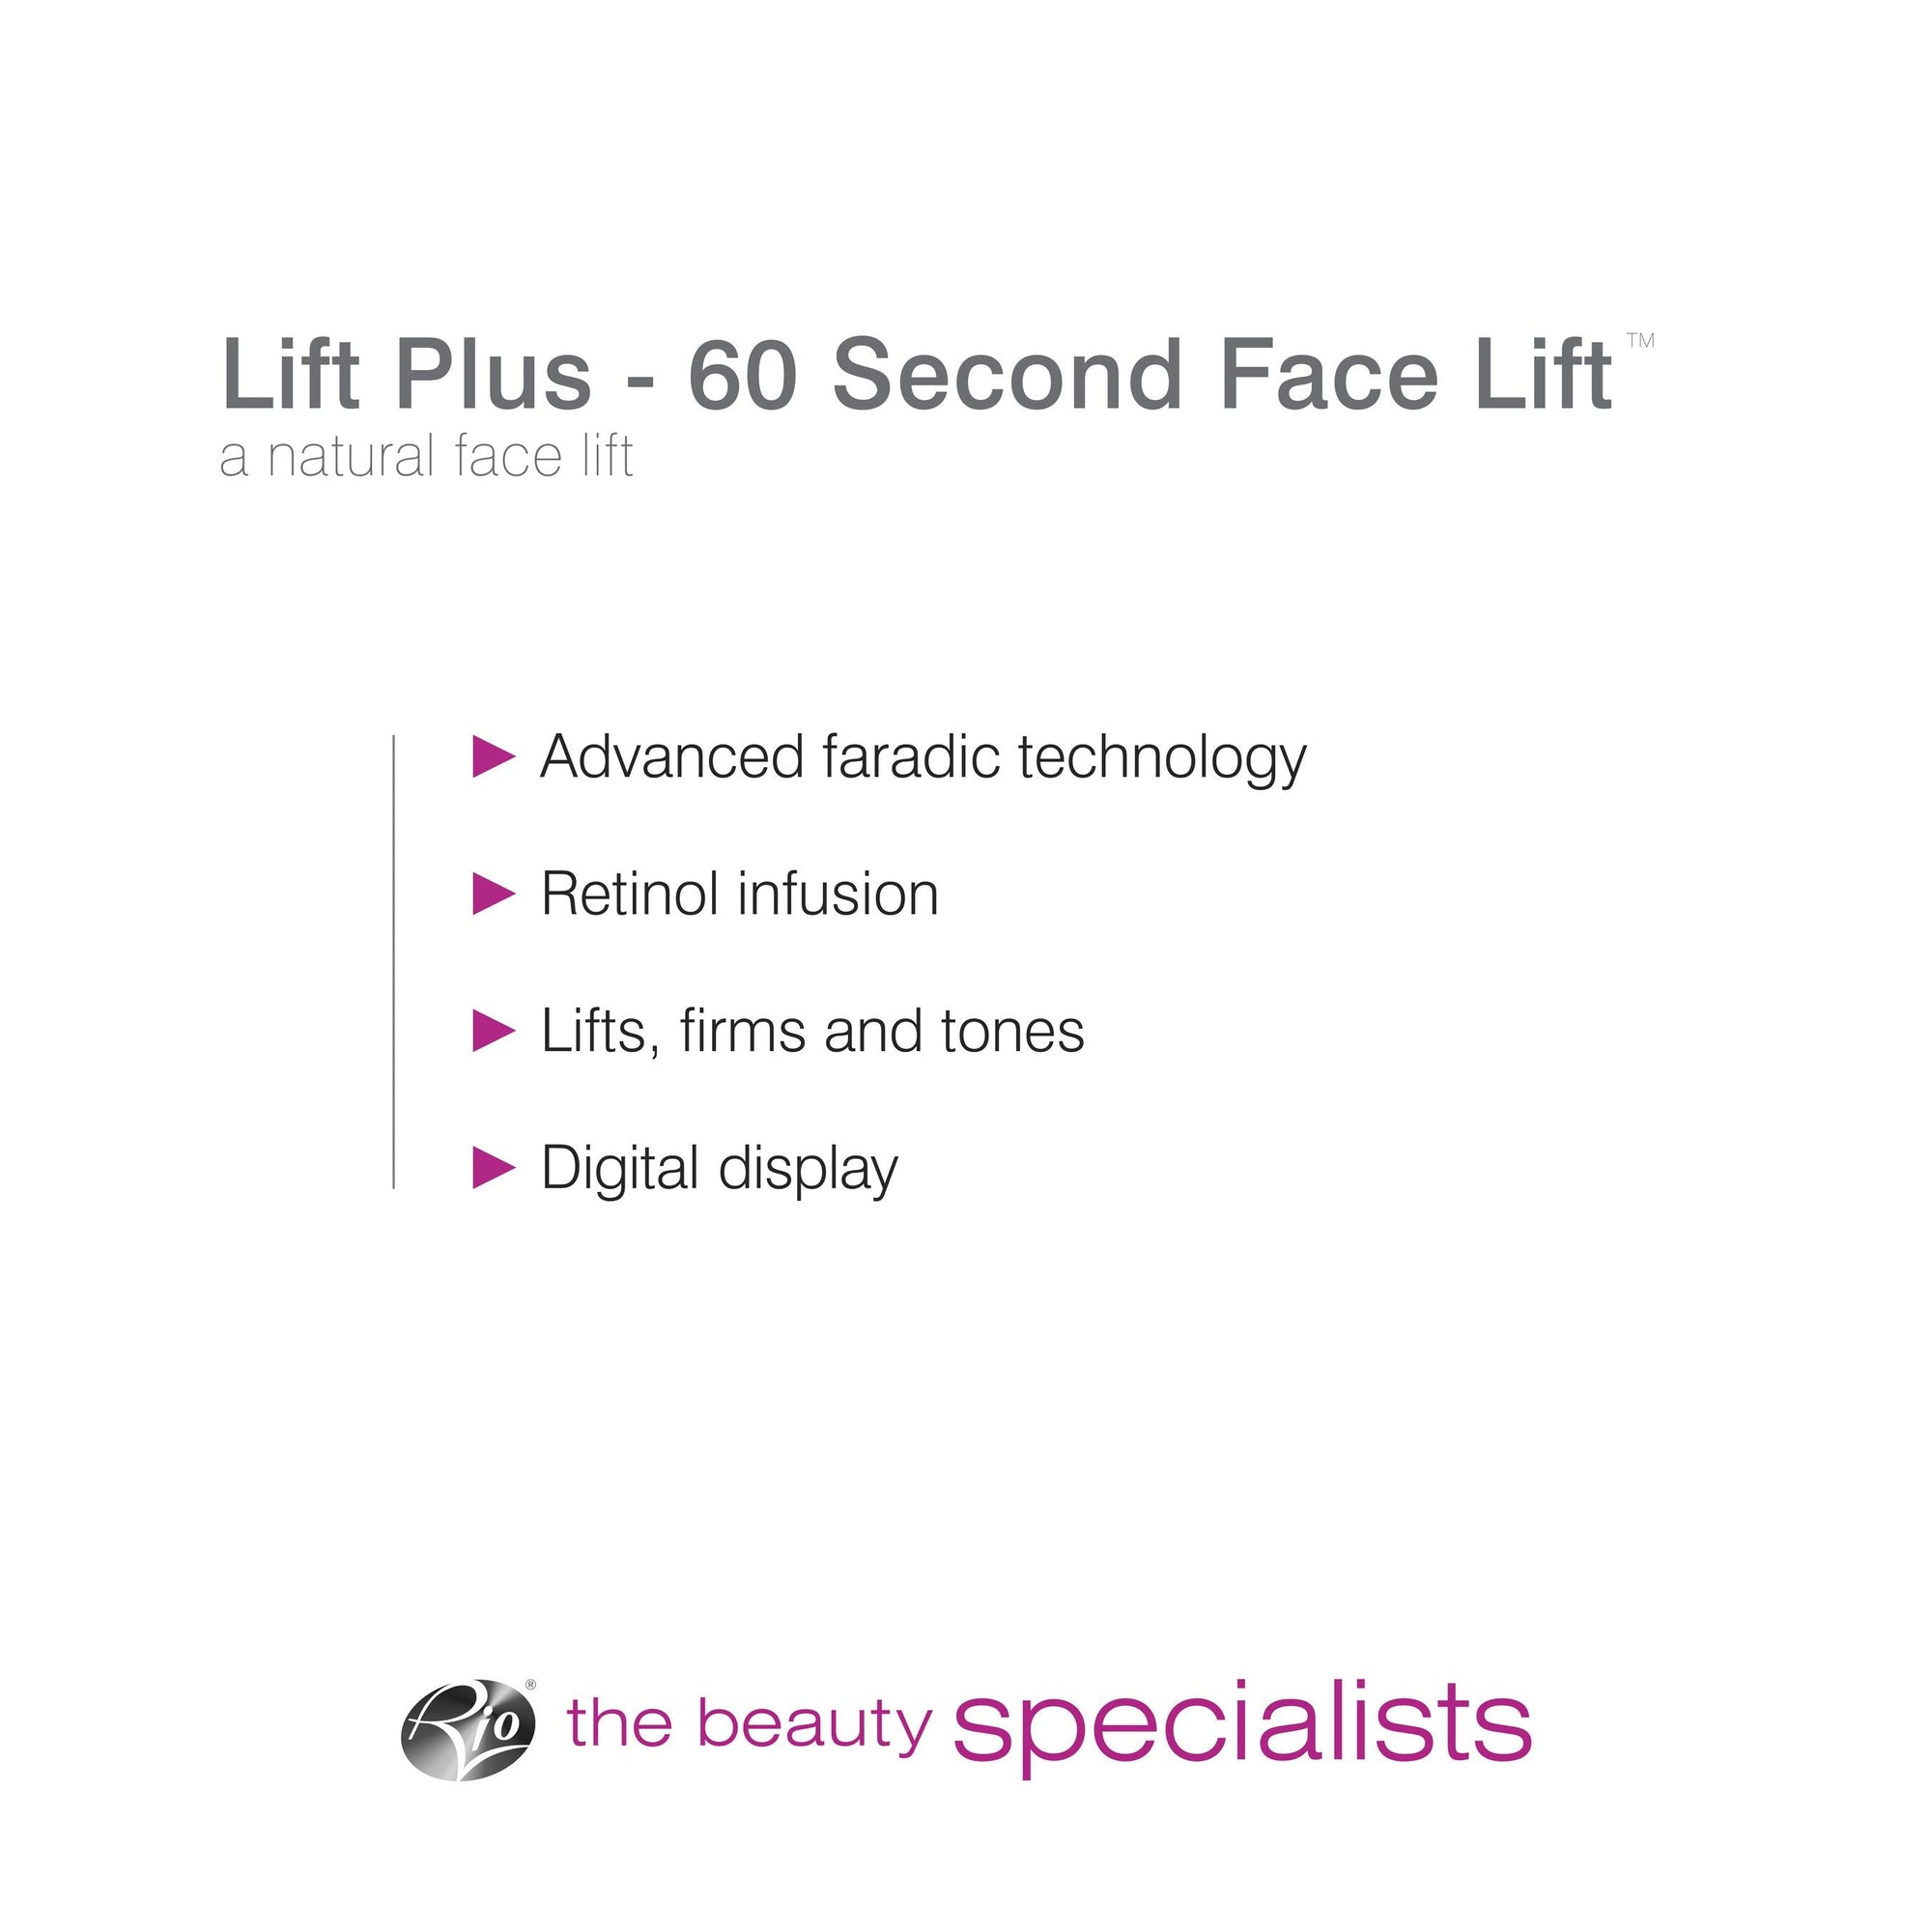 bulleted text listing the features of the Rio lift plus 60 second face lift advanced faradic technology retinol infusion lifts firms and tones digital display